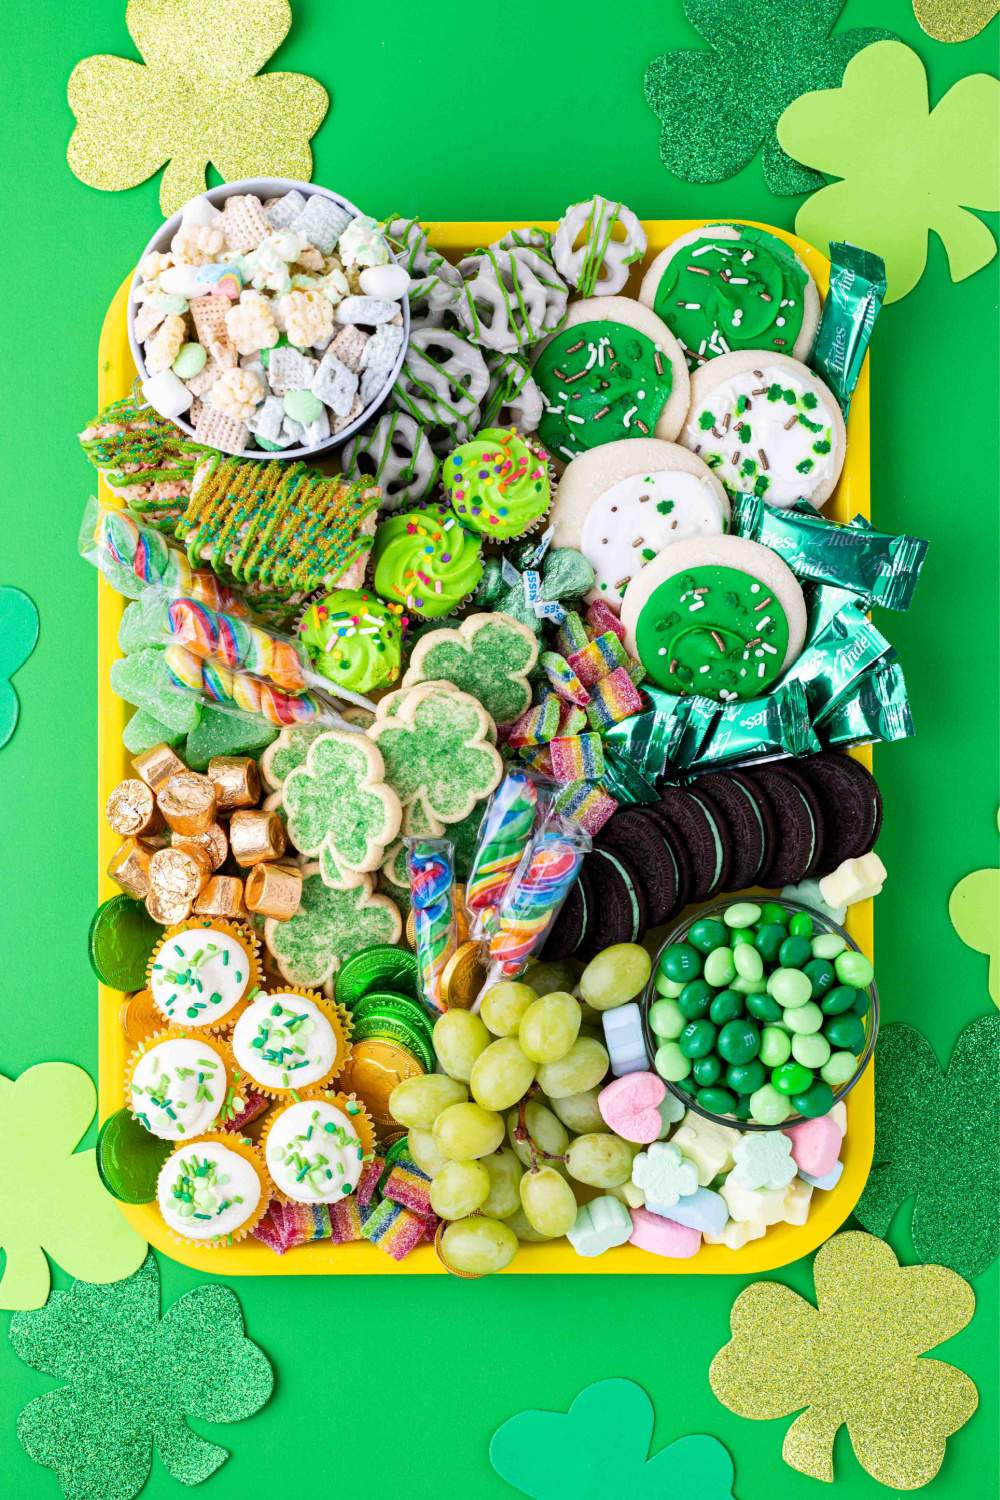 Are you looking for a fun and festive way to celebrate St. Patrick's Day? Why not try creating a charcuterie board for St. Patrick's Day? via @familyfresh